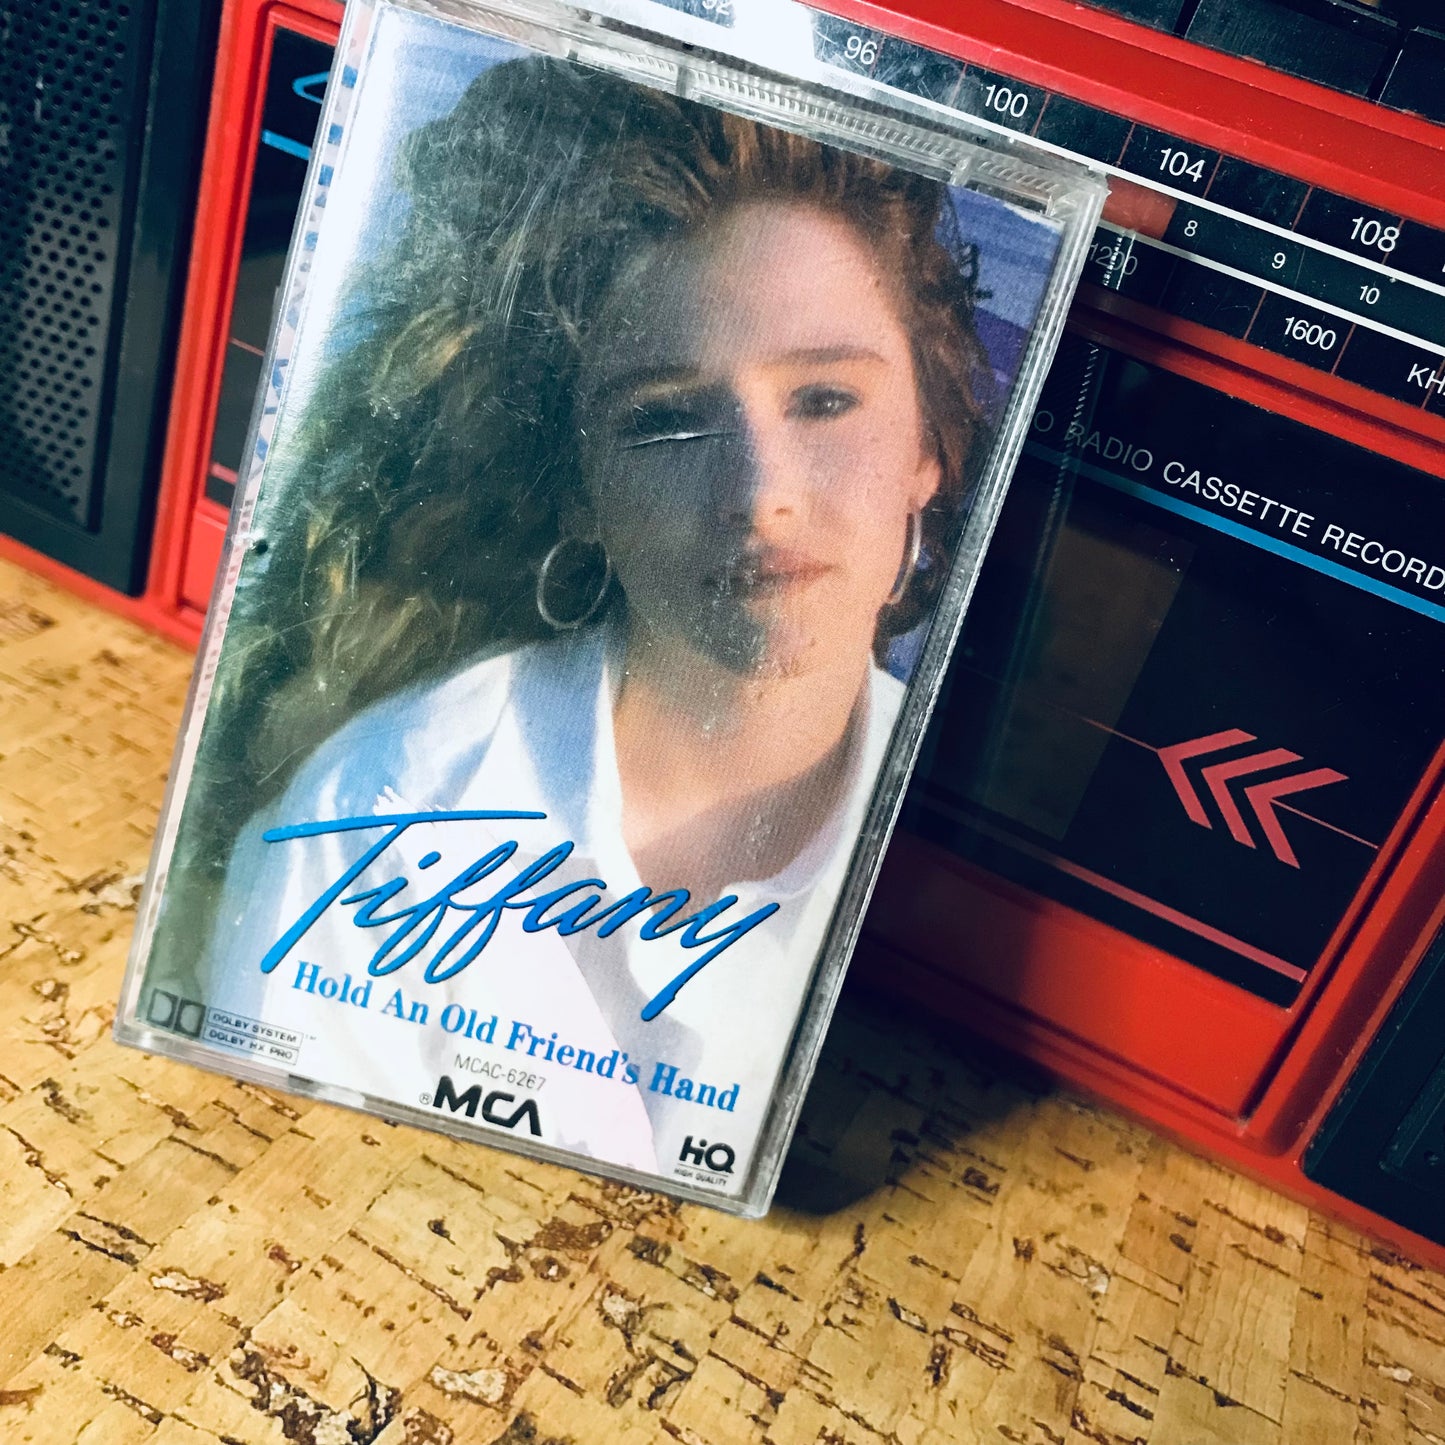 1988 Tiffany Hold An Old Friend's Hand Cassette Tape